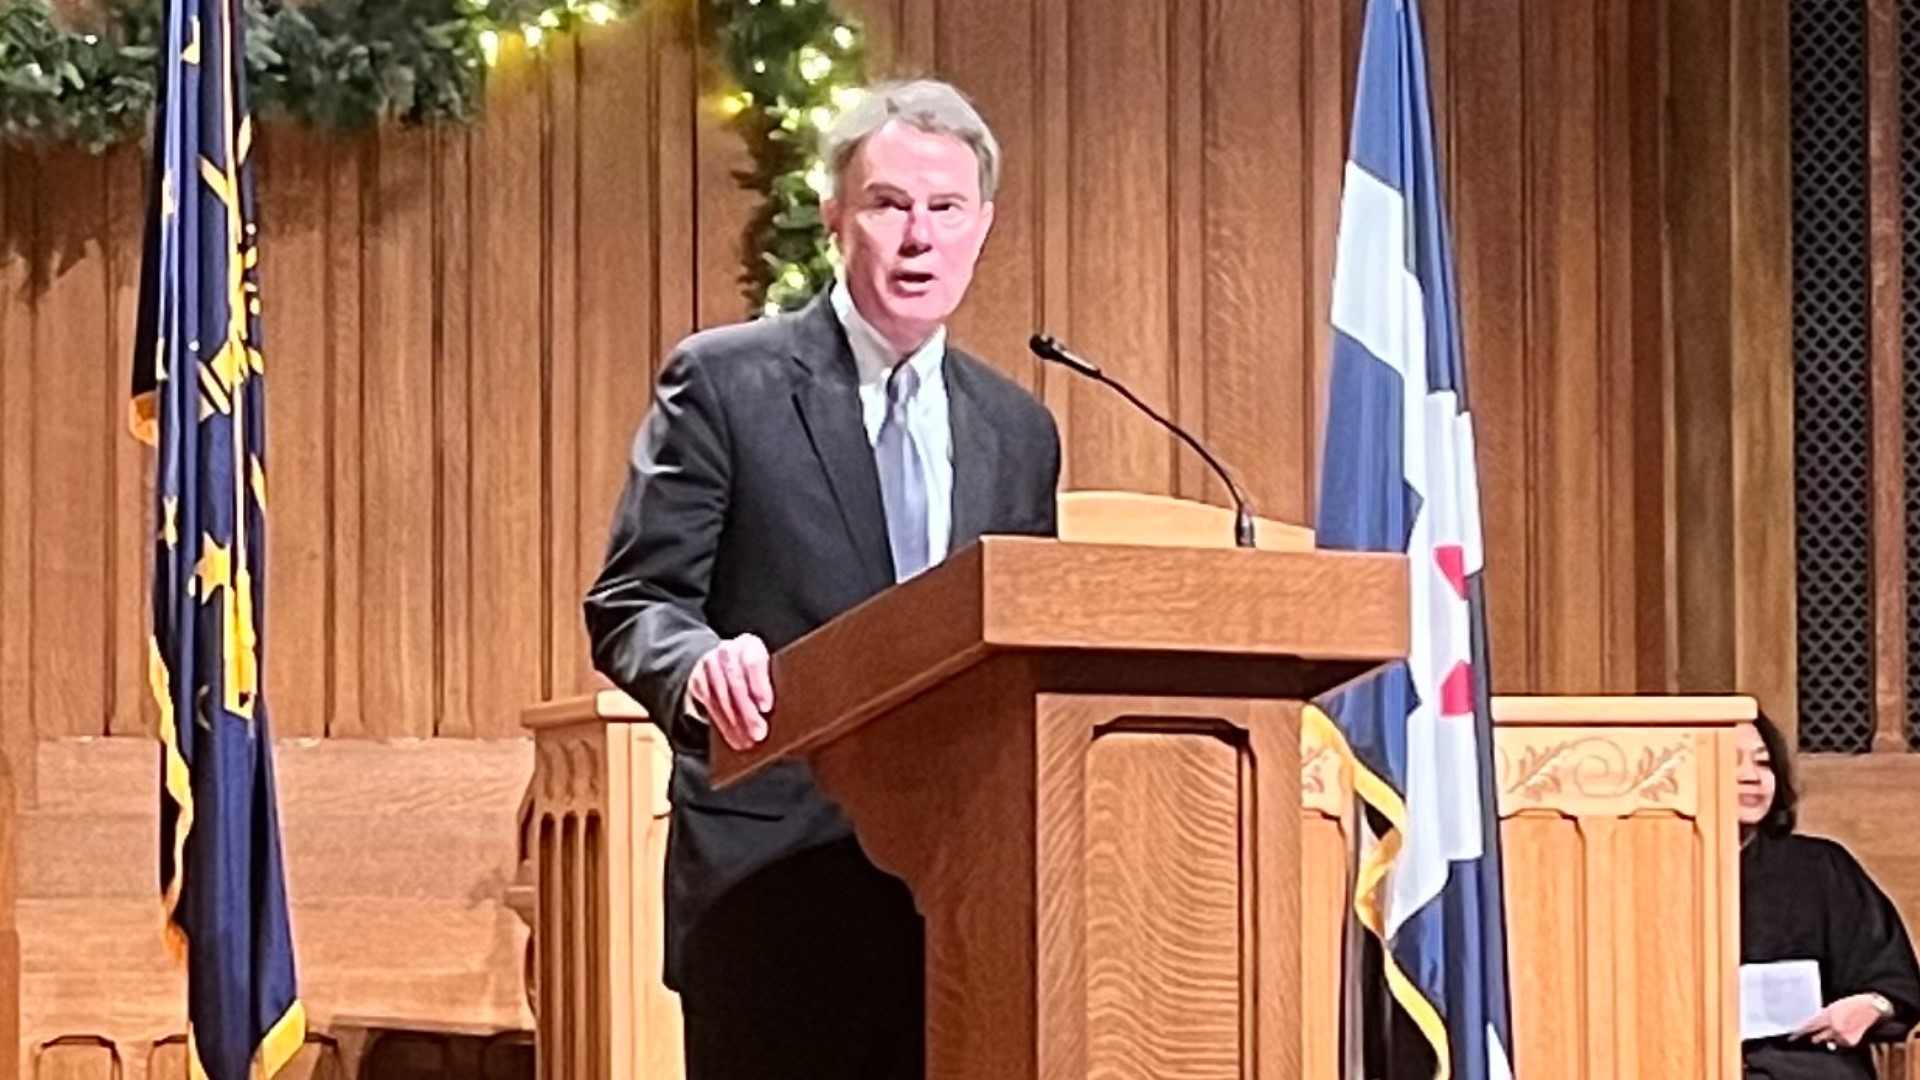 Hogsett addressed clergy early today on his plans to make the city and those who live here more prosperous.